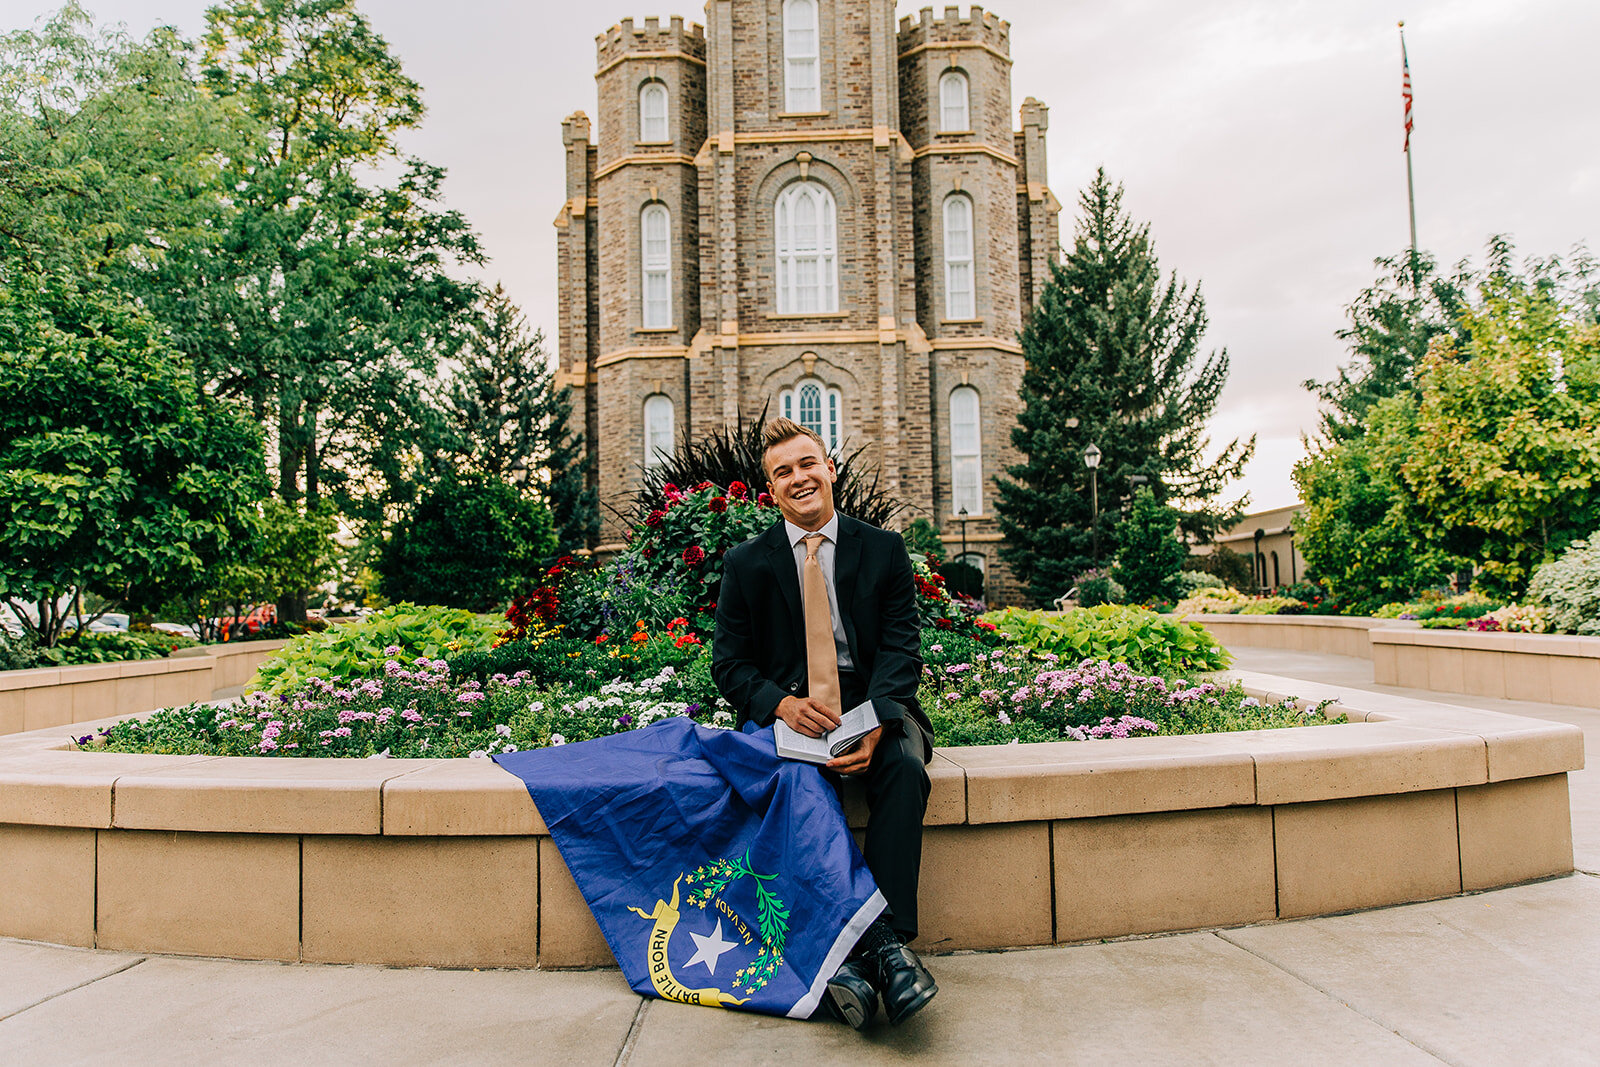  young man missionary reading his scriptures book of mormon stories logan utah temple nevada state flag prop for missionary photos ideas for poses professional missionary portraits cache valley utah #bellaalderphoto #missionary #missionaryportraits #